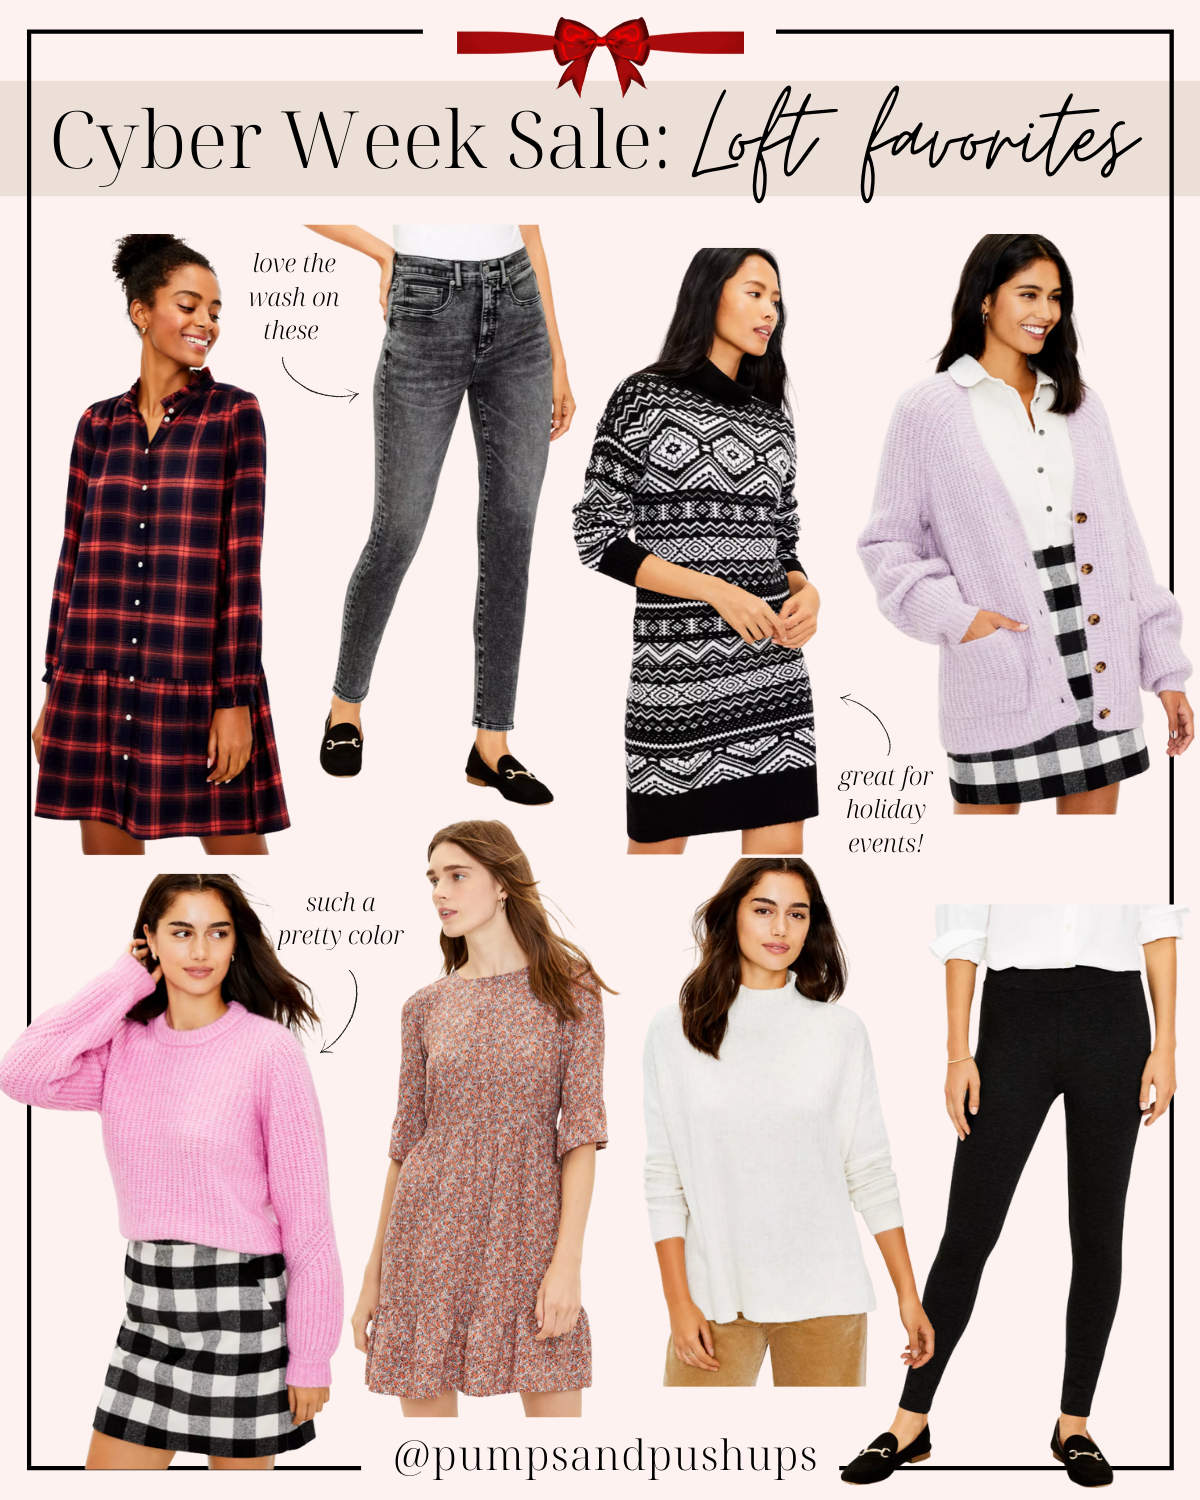 Express Black Friday Sale  5 Outfit Ideas Now 50% Off - Katie's Bliss